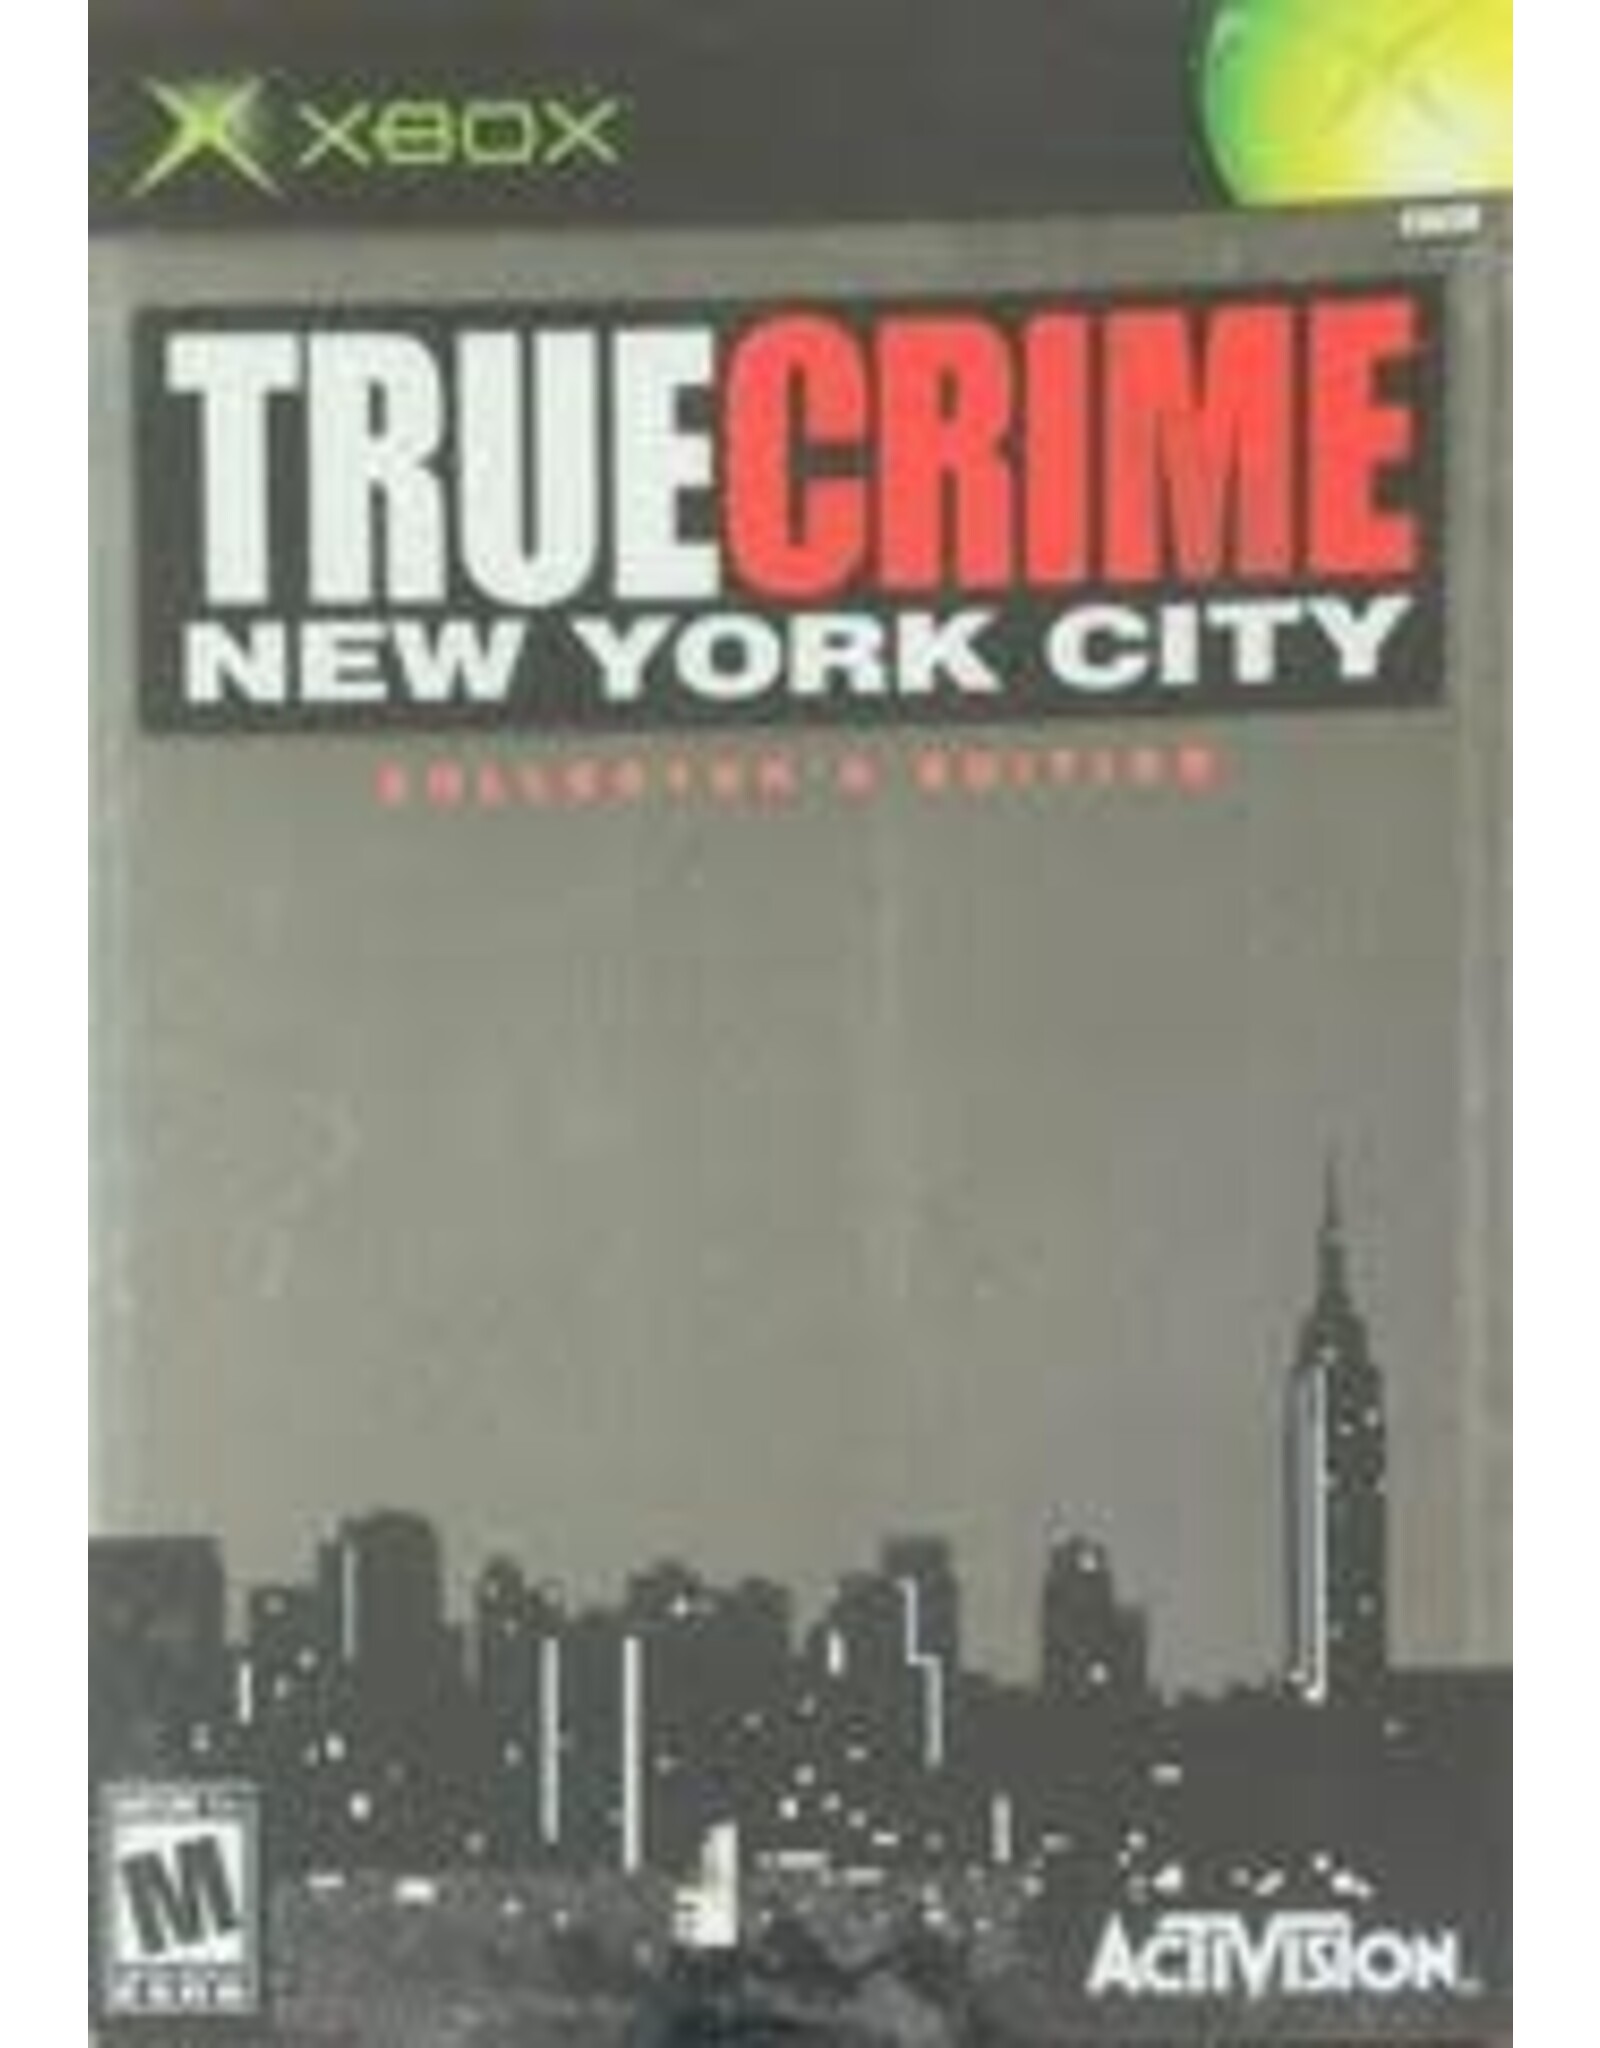 Xbox True Crime New York City Collector's Edition (Used, No Manual, Cosmetic Damage)